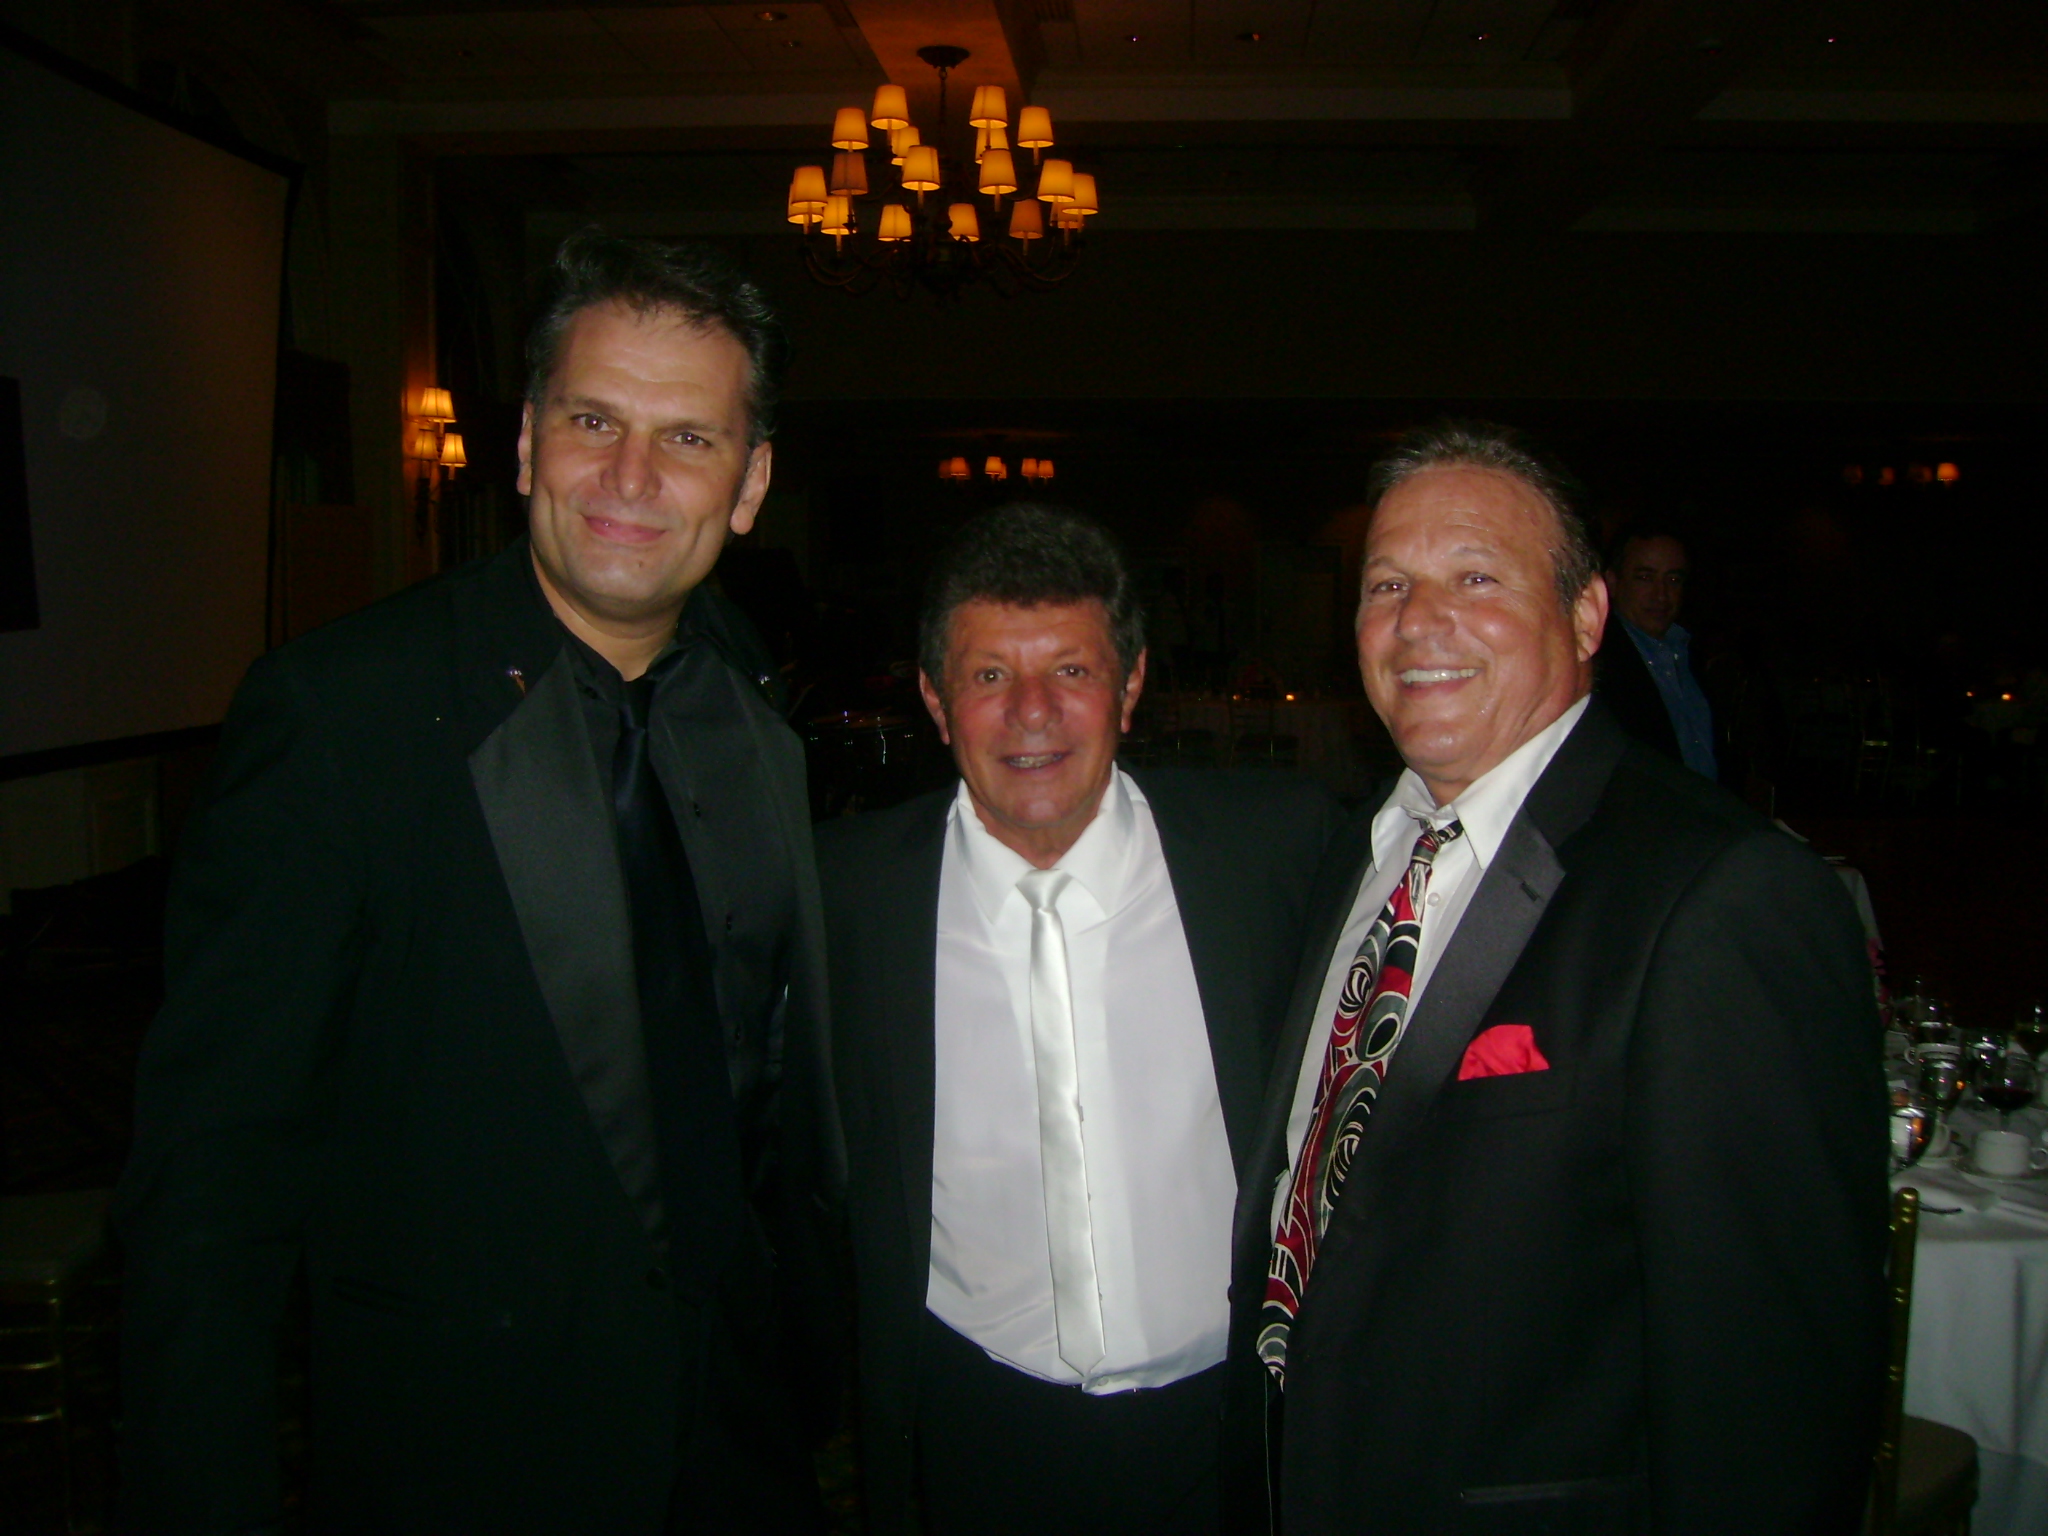 Played in band to back-up the one and only Mr. Frankie Avalon for his show as drummer, - pic after gig with Frankie Avalon and Broadways's Mr. Pat Jude.